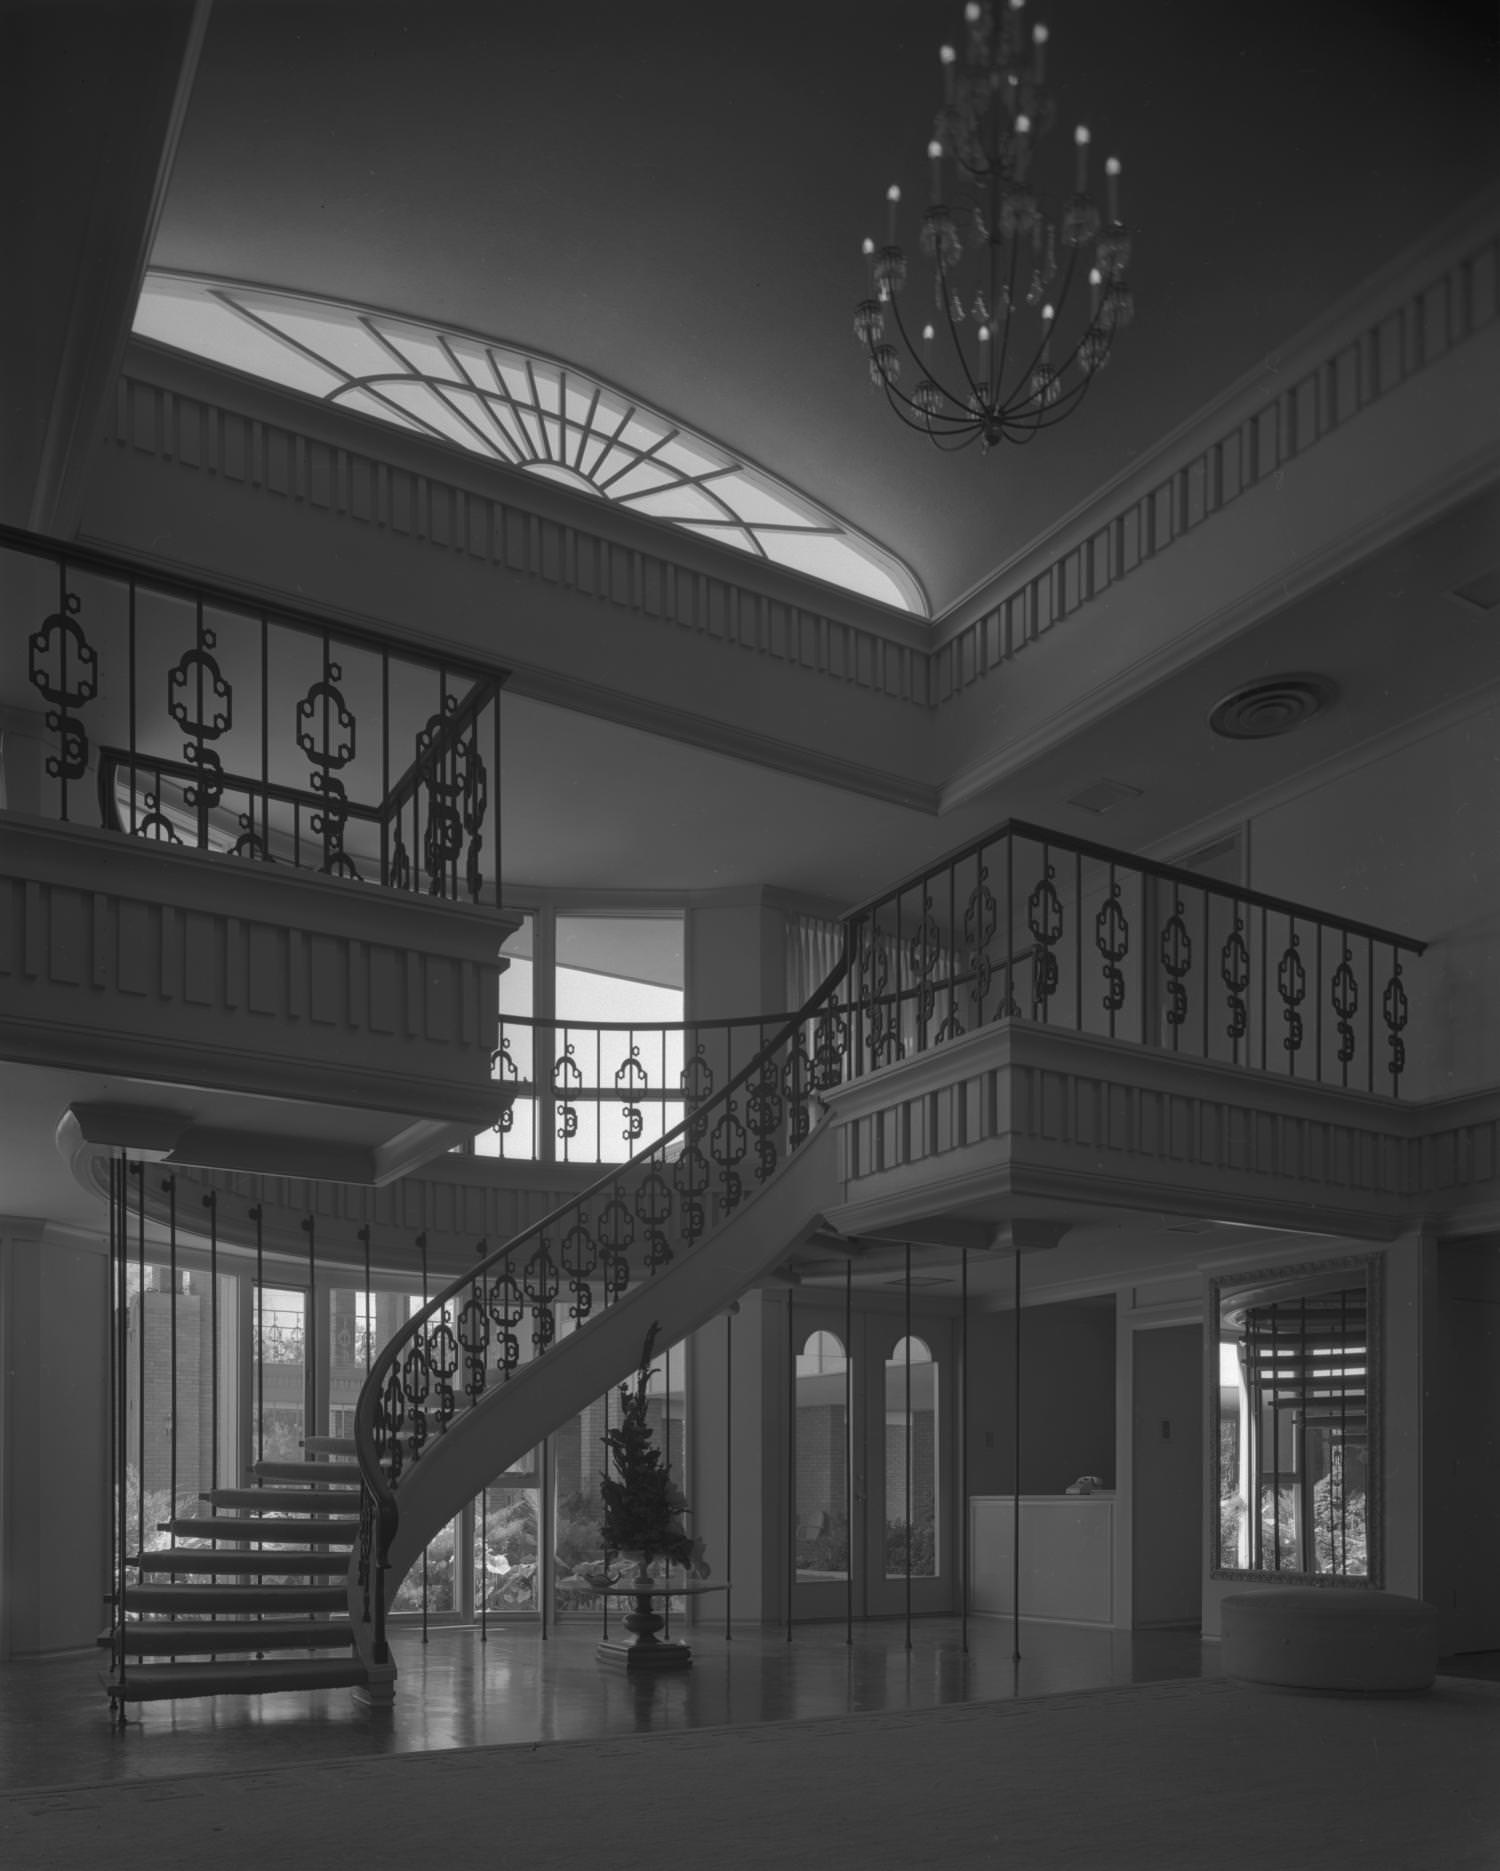 The Greek revival styled interior of the Gamma Phi Beta sorority house located at 2622 Wichita Street, 1960